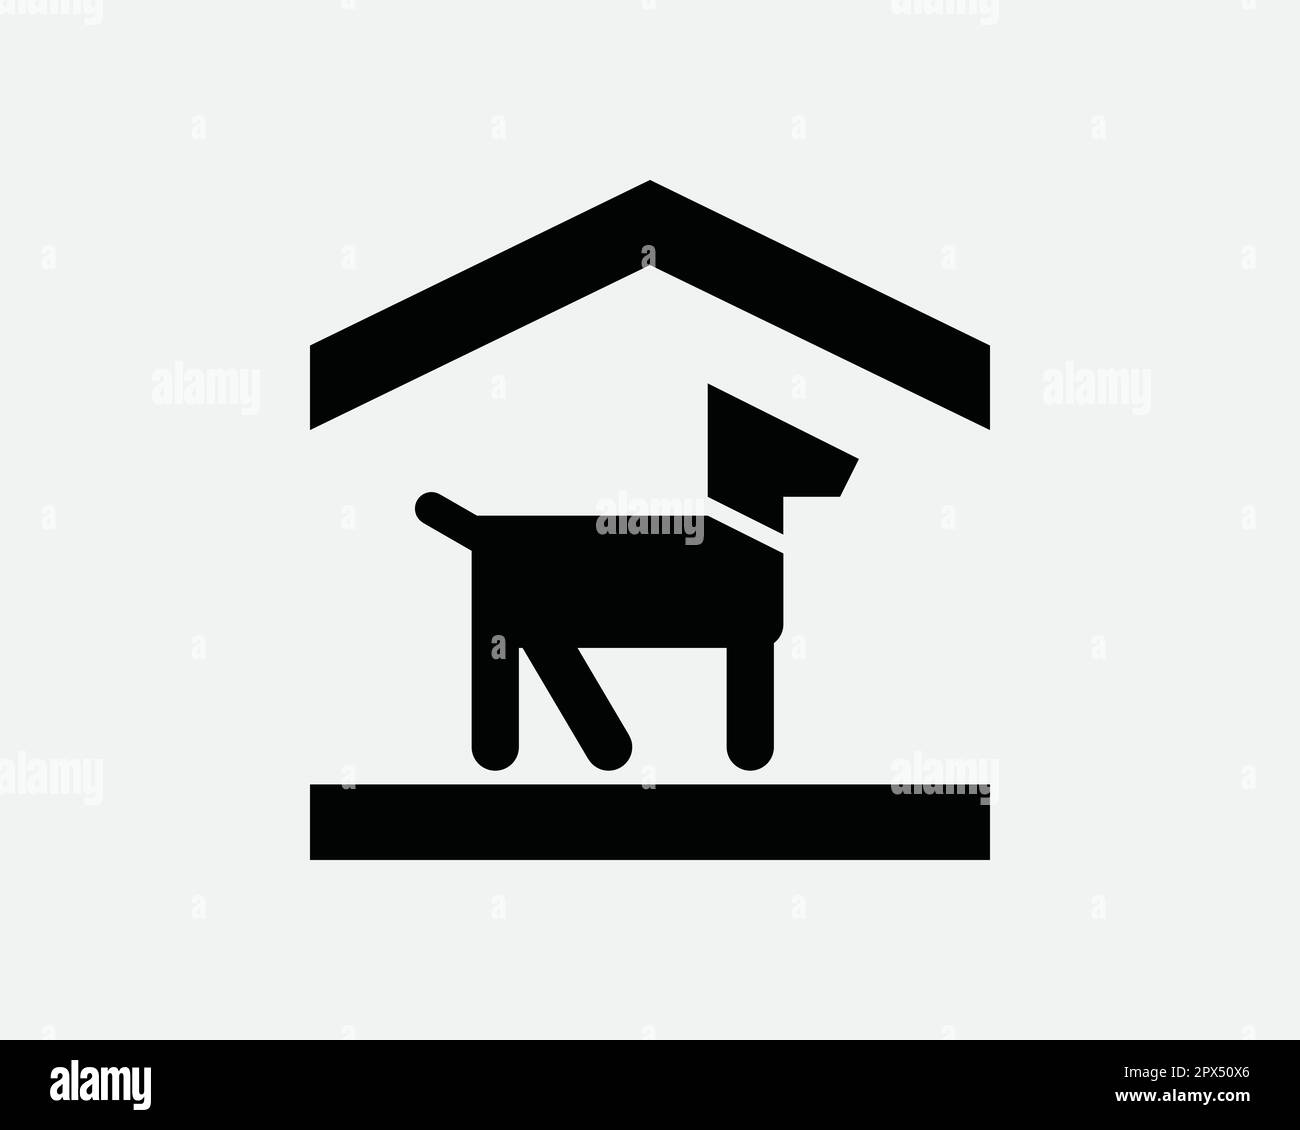 Dog Shelter Icon. Canine Animal Home House Boarding Hut Cabin Symbol. Indoor Pet Adoption Care Center Sign Vector Graphic Illustration Clipart Cricut Stock Vector